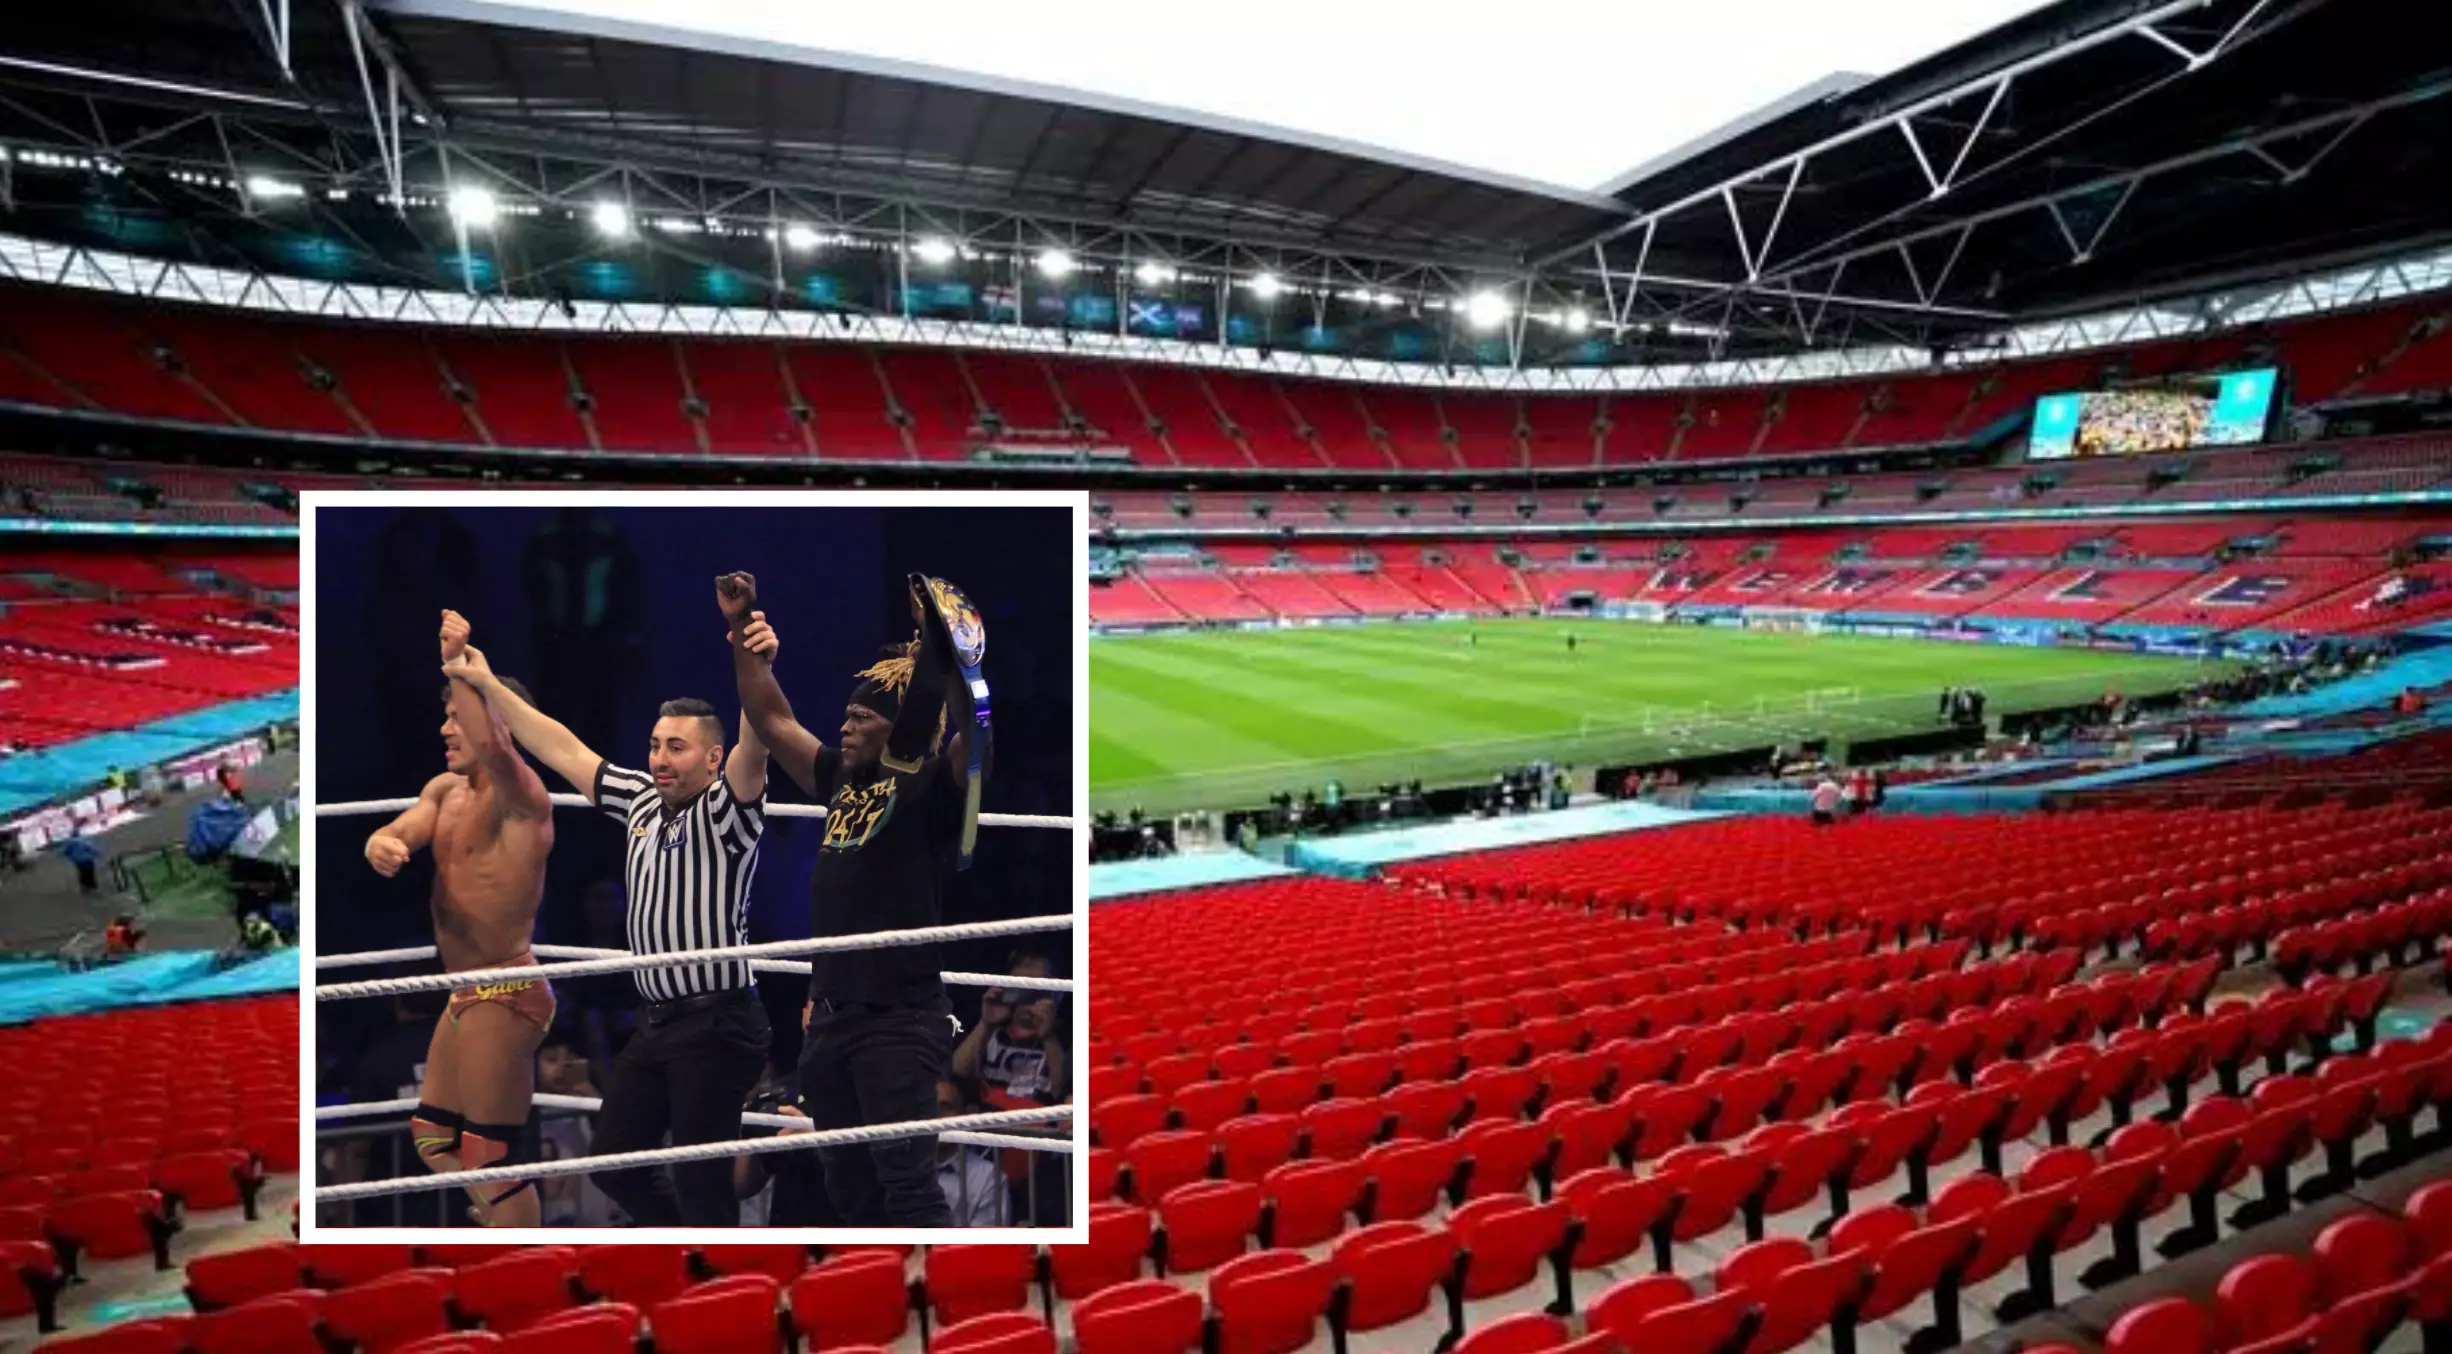 WWE To Hold 'Huge UK Pay-Per-View Event' At Wembley in September 2022